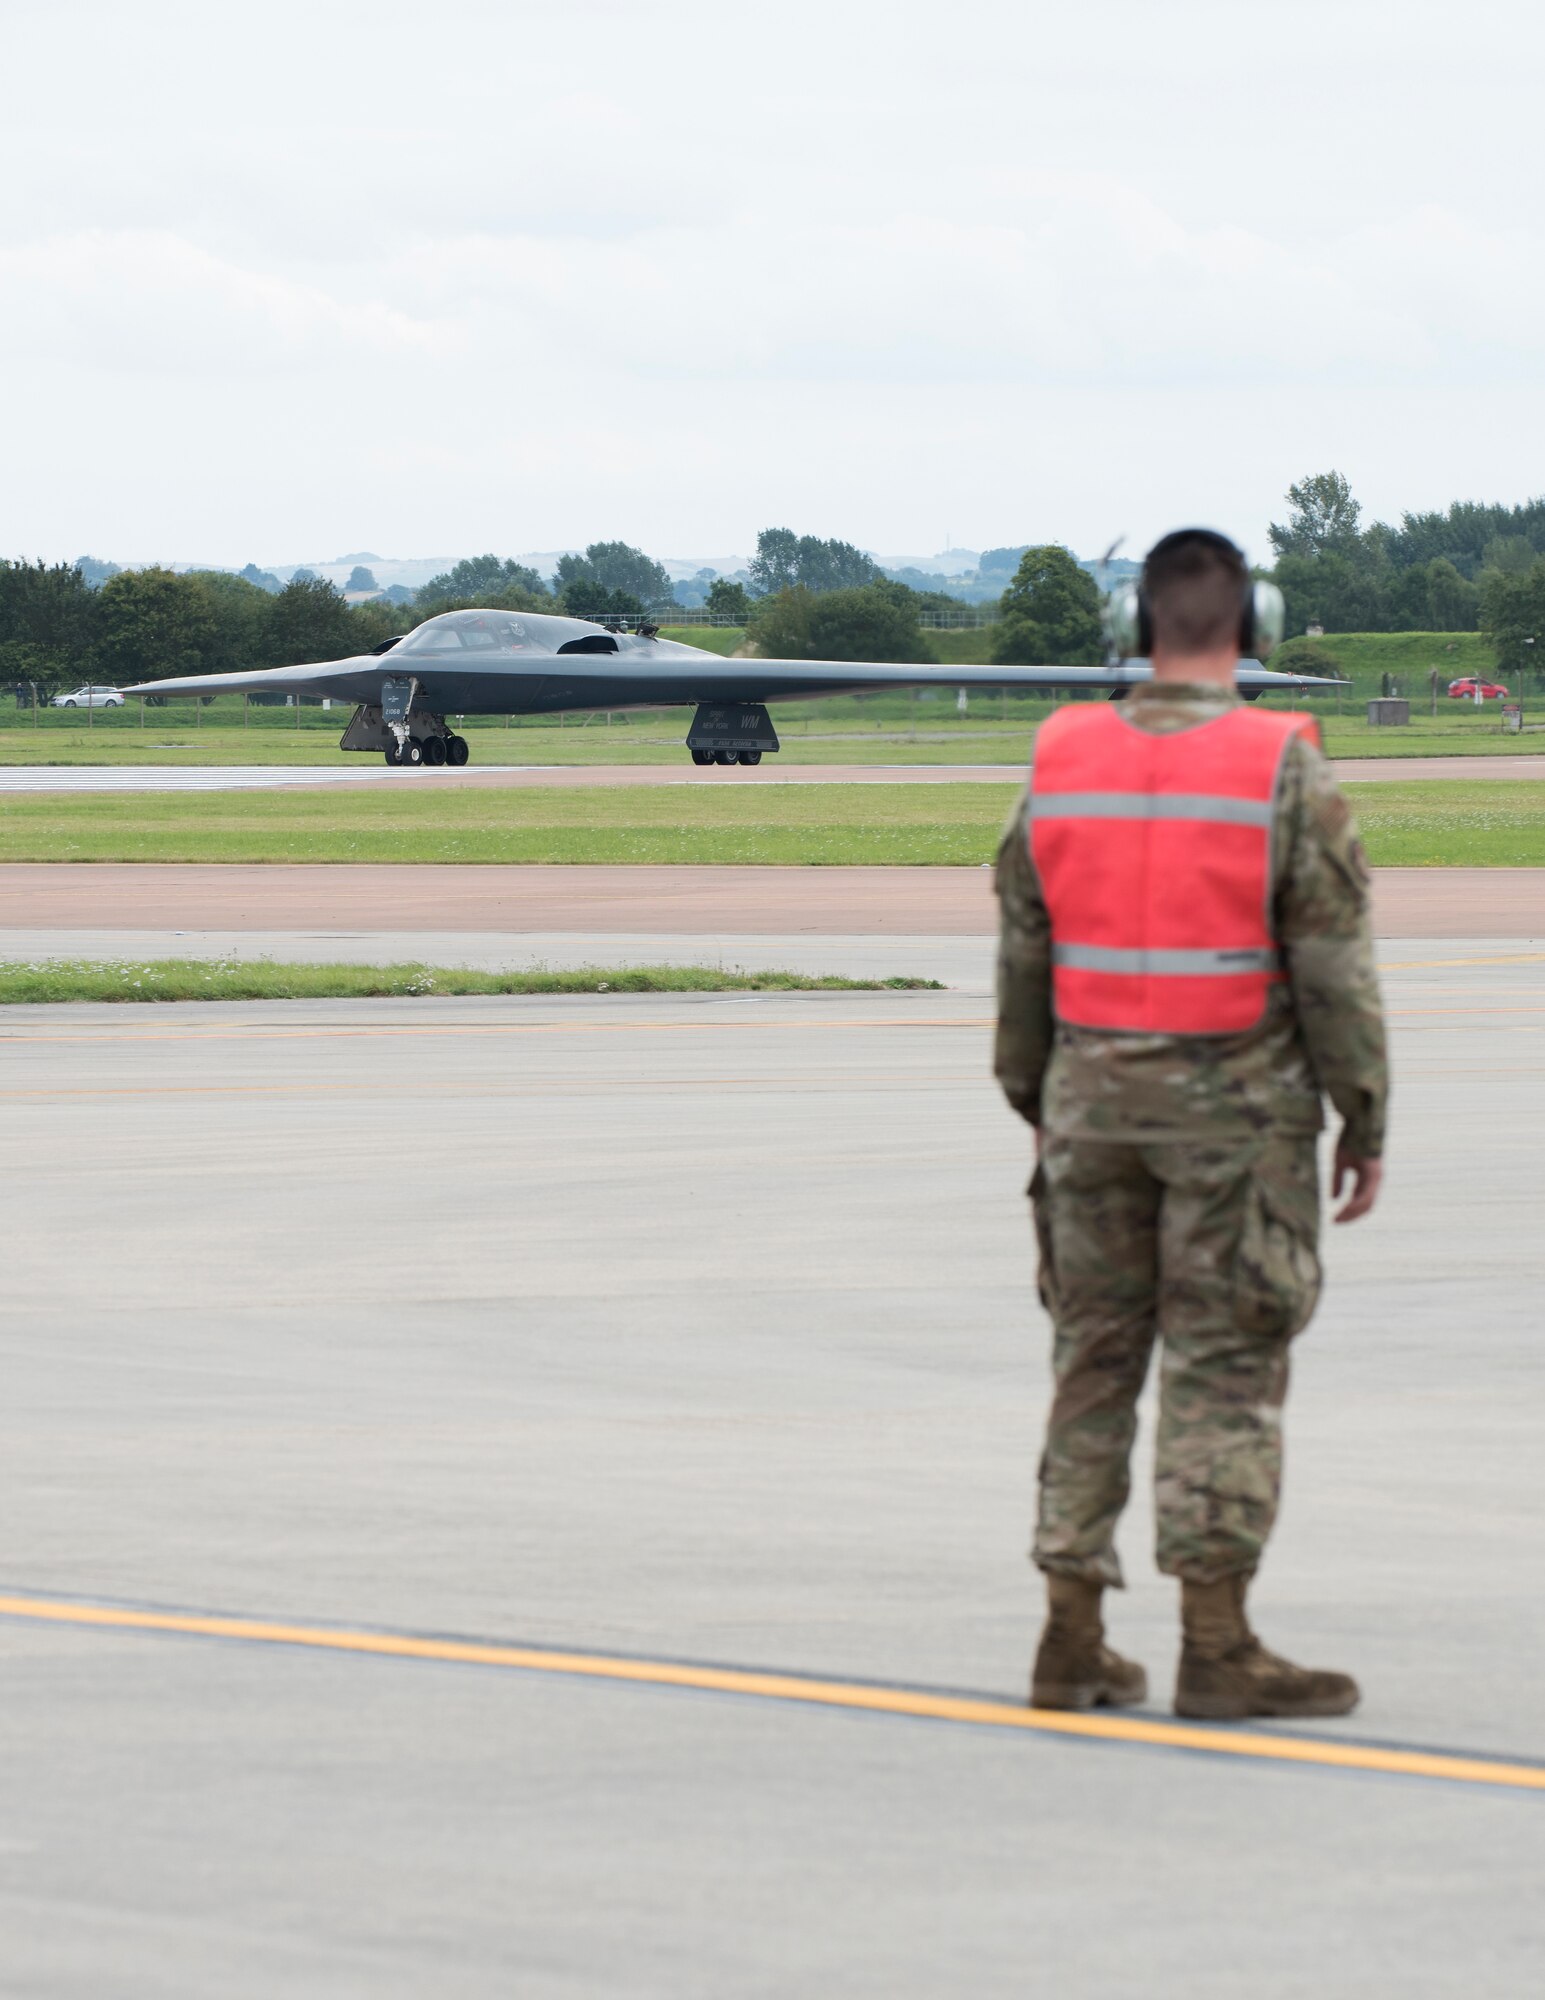 Major General James Dawkins Jr., Eighth Air Force commander, taxis in a B-2 Spirit on the flight line of Royal Air Force Base Fairford, England, on August 28, 2019. Dawkins flew the stealth bomber during his visit to engage with members of Whiteman Air Force Base, Missouri, who had deployed to Royal Air Force Fairford as a Bomber Task Force to conduct theater integration and flying training. (U.S. Air Force photo by Staff Sgt. Kayla White)